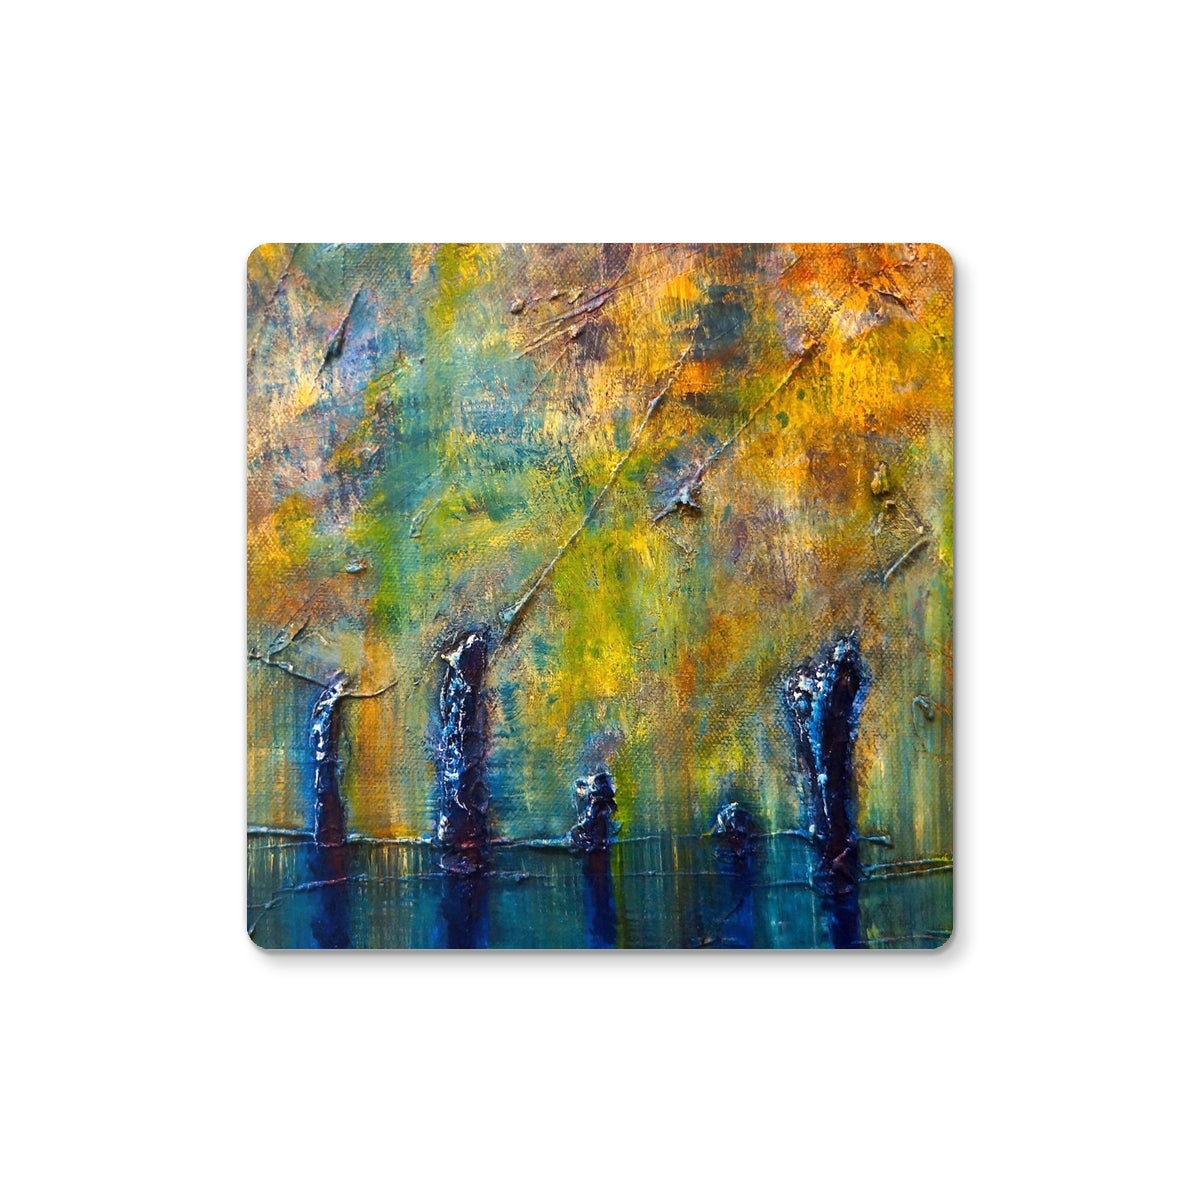 Stenness Moonlight Orkney Art Gifts Coaster-Coasters-Orkney Art Gallery-Single Coaster-Paintings, Prints, Homeware, Art Gifts From Scotland By Scottish Artist Kevin Hunter